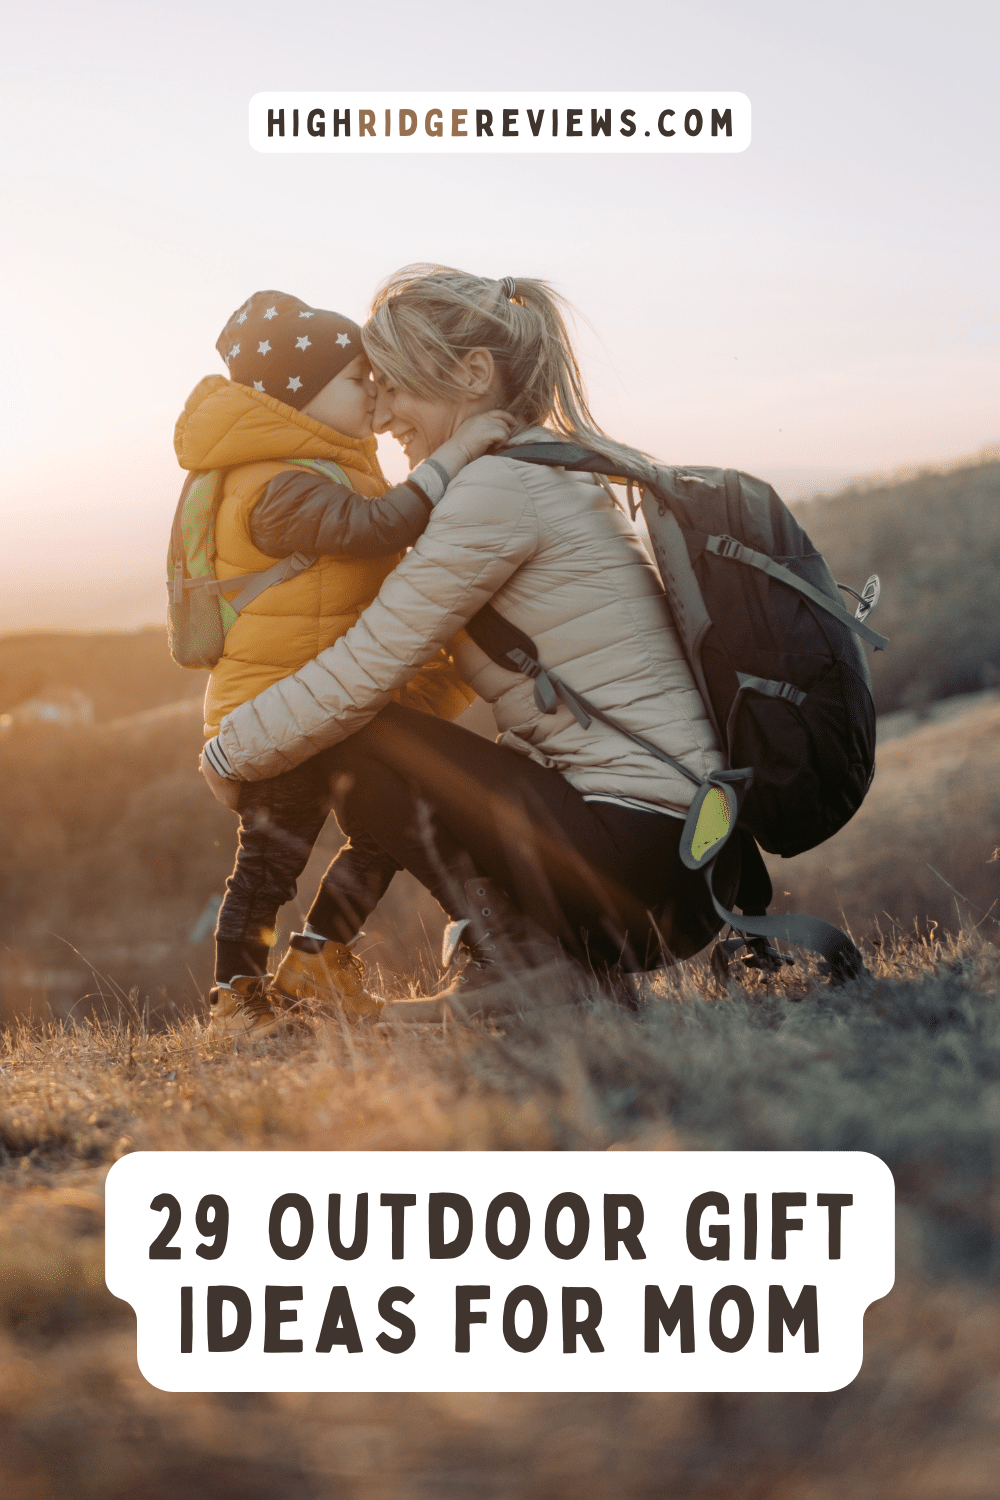 29 Outdoor Gifts For Mom To Spark Her Wanderlust